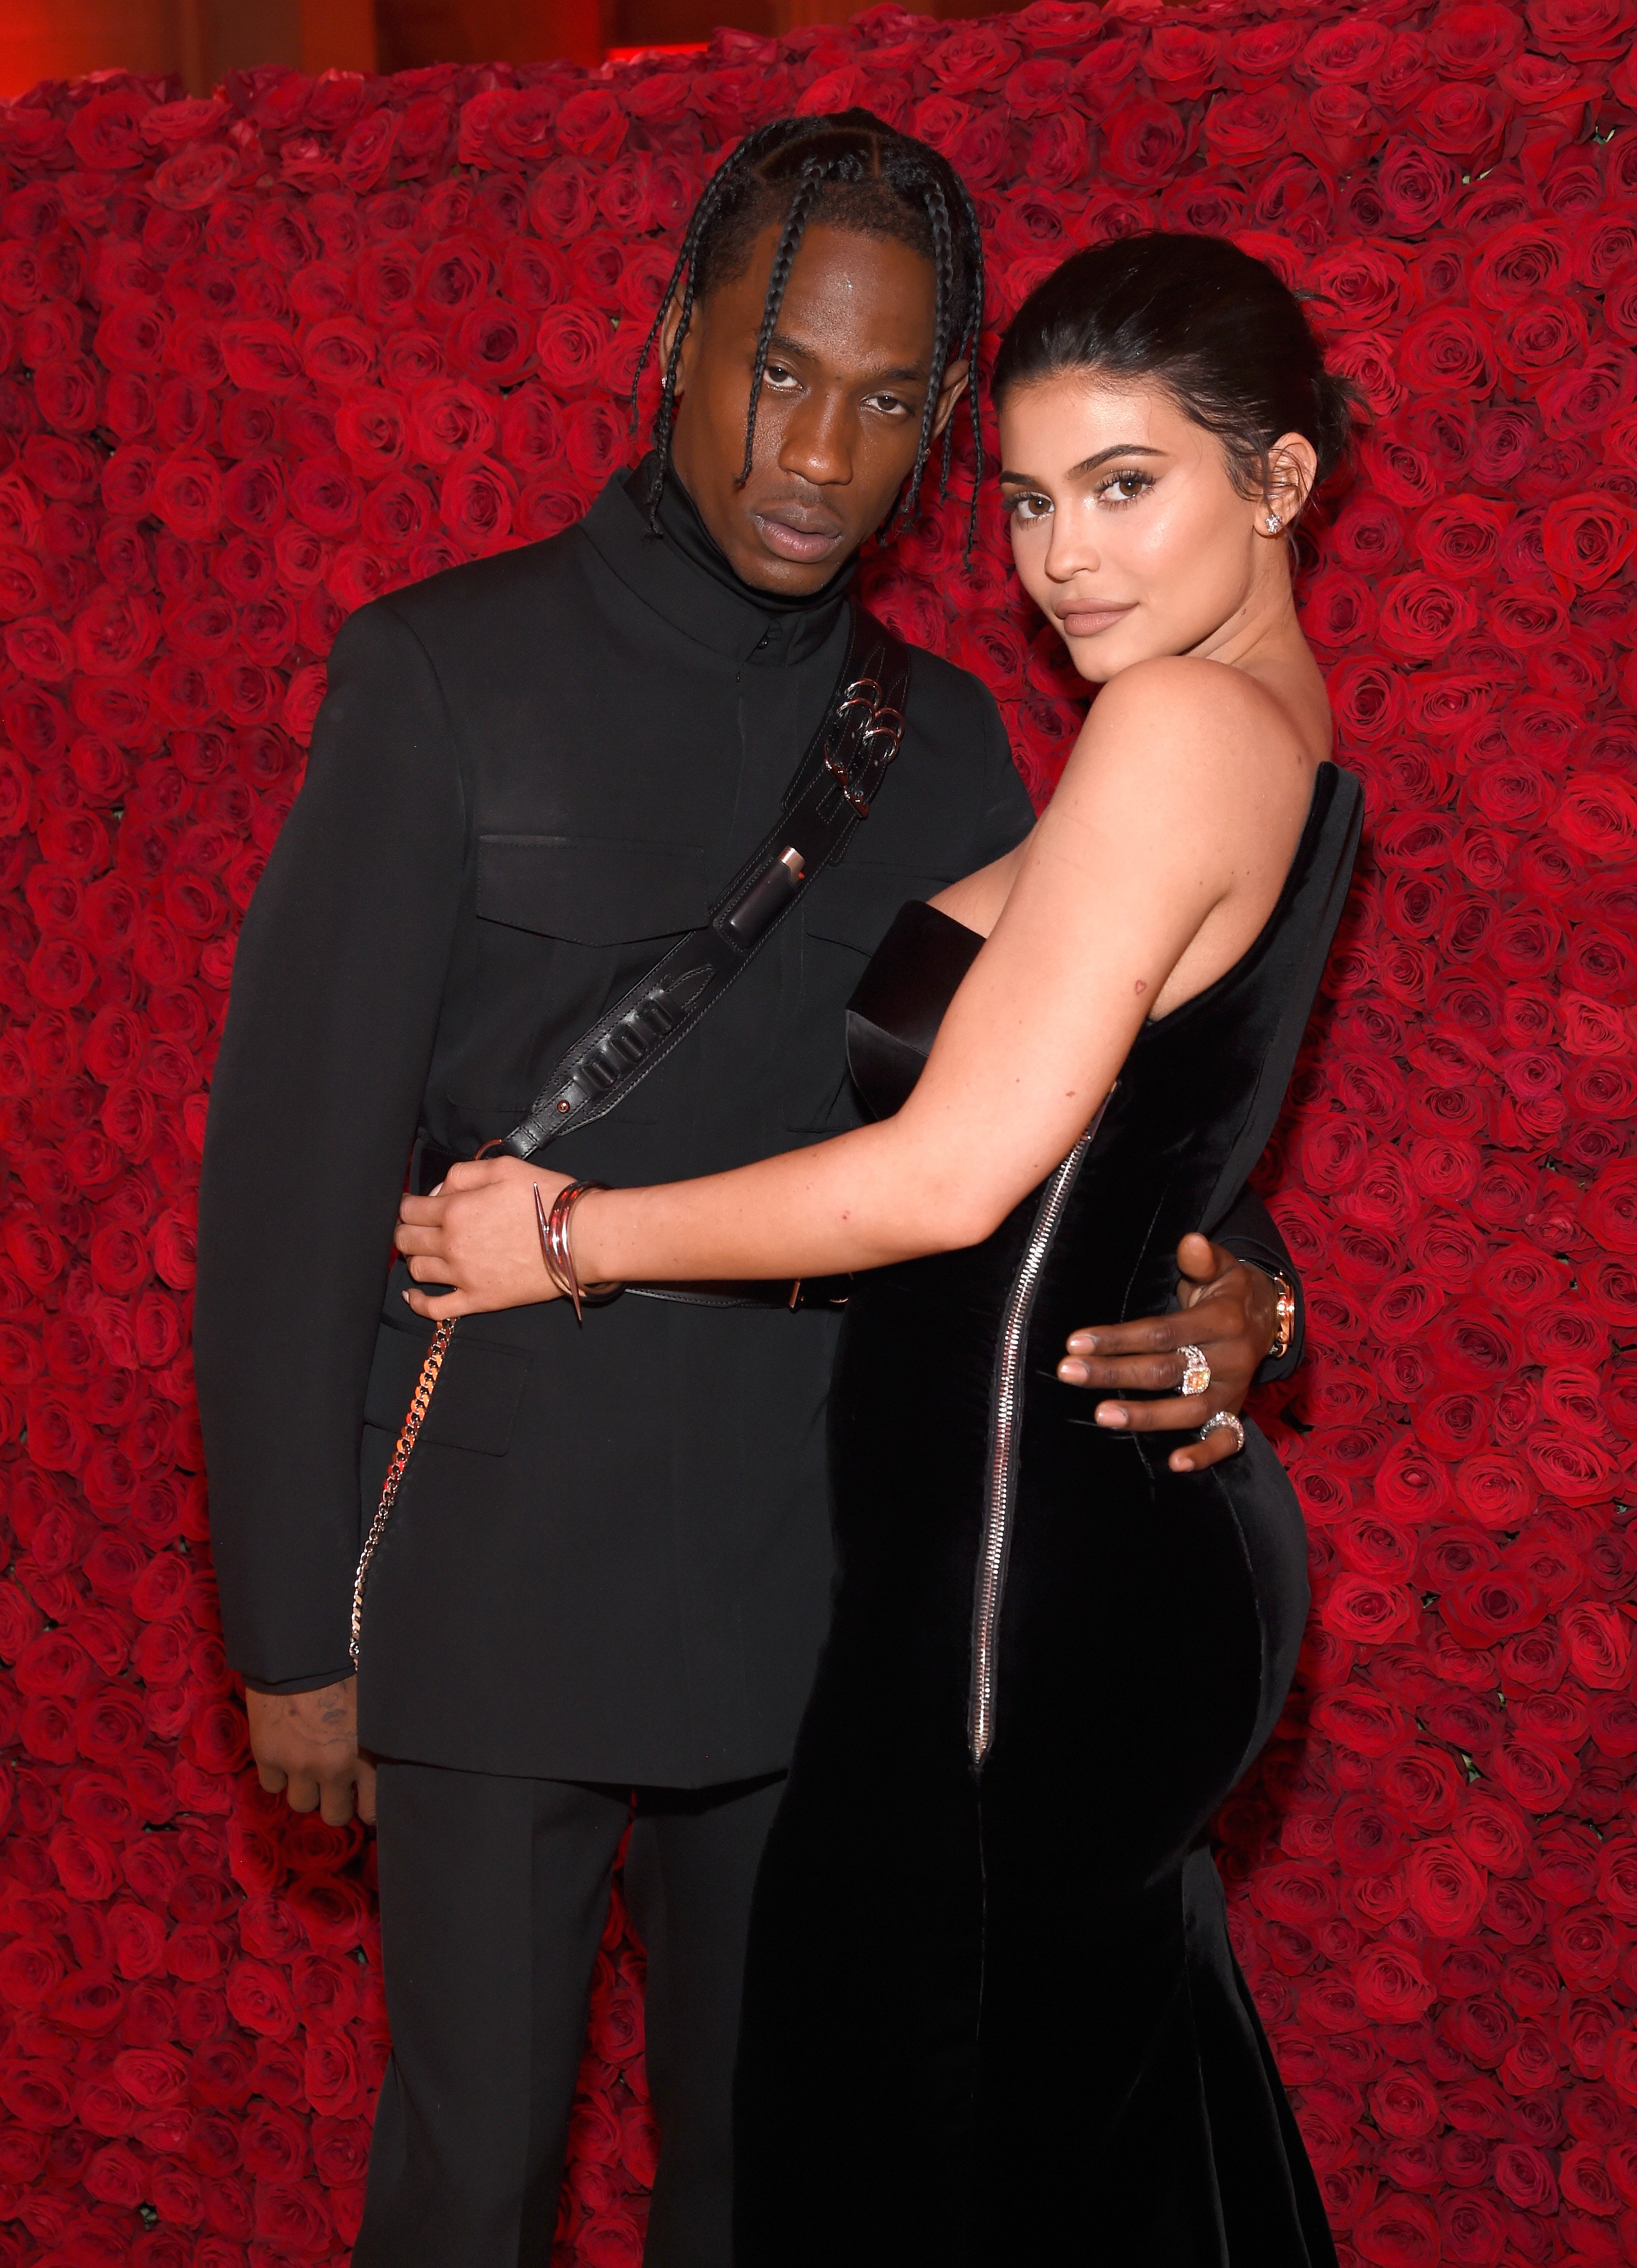 Kylie Jenner & Travis Scott at the MET Gala in New York City on May 7, 2018. |Photo: Getty Images